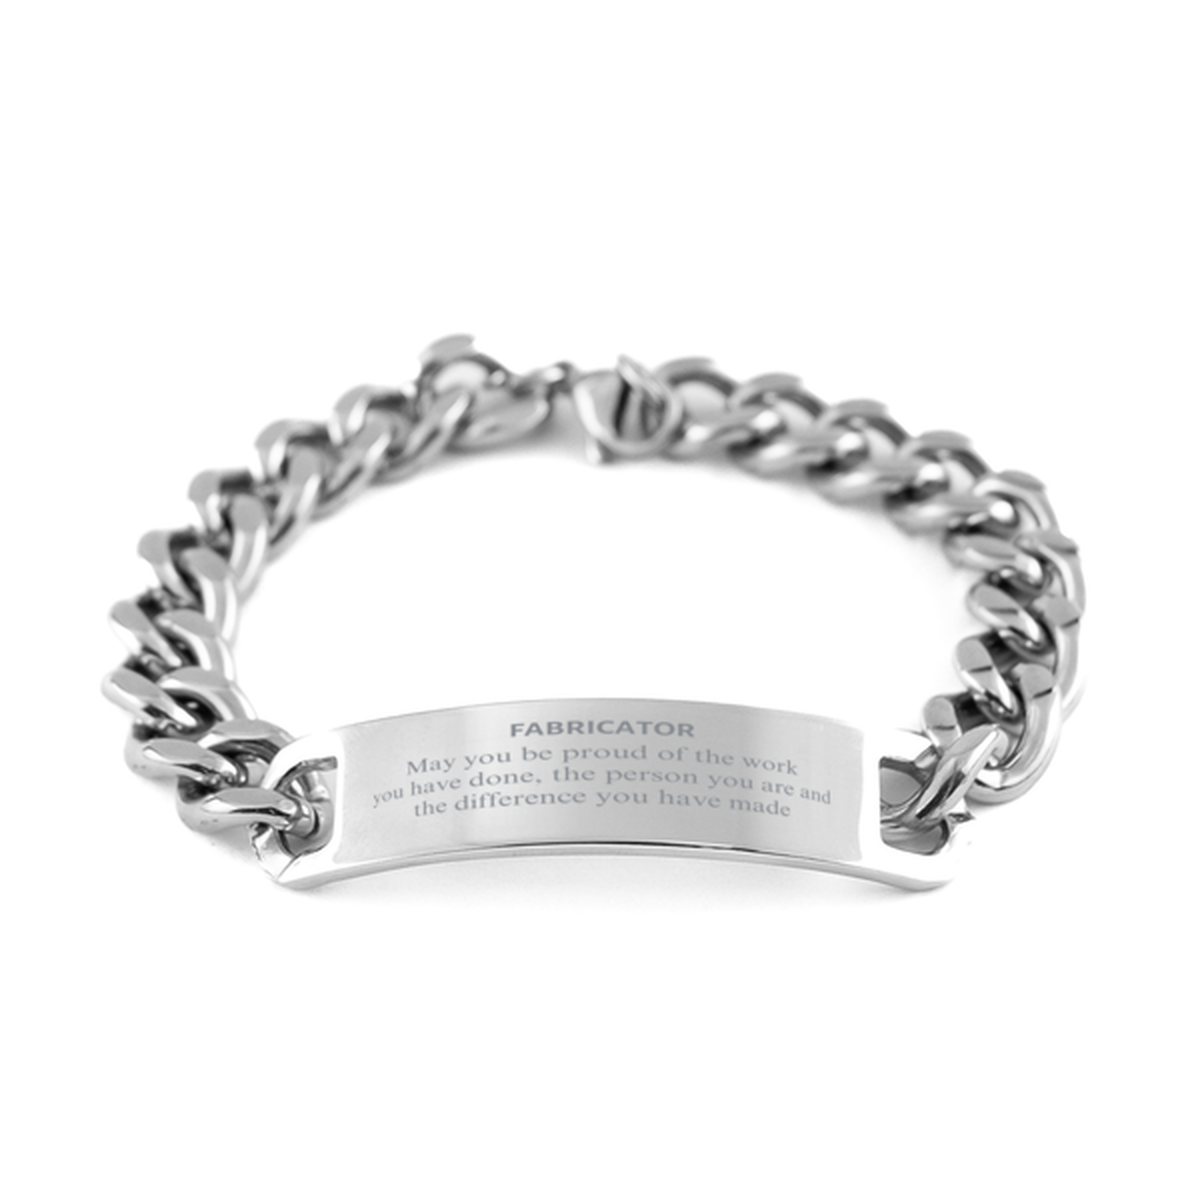 Fabricator May you be proud of the work you have done, Retirement Fabricator Cuban Chain Stainless Steel Bracelet for Colleague Appreciation Gifts Amazing for Fabricator